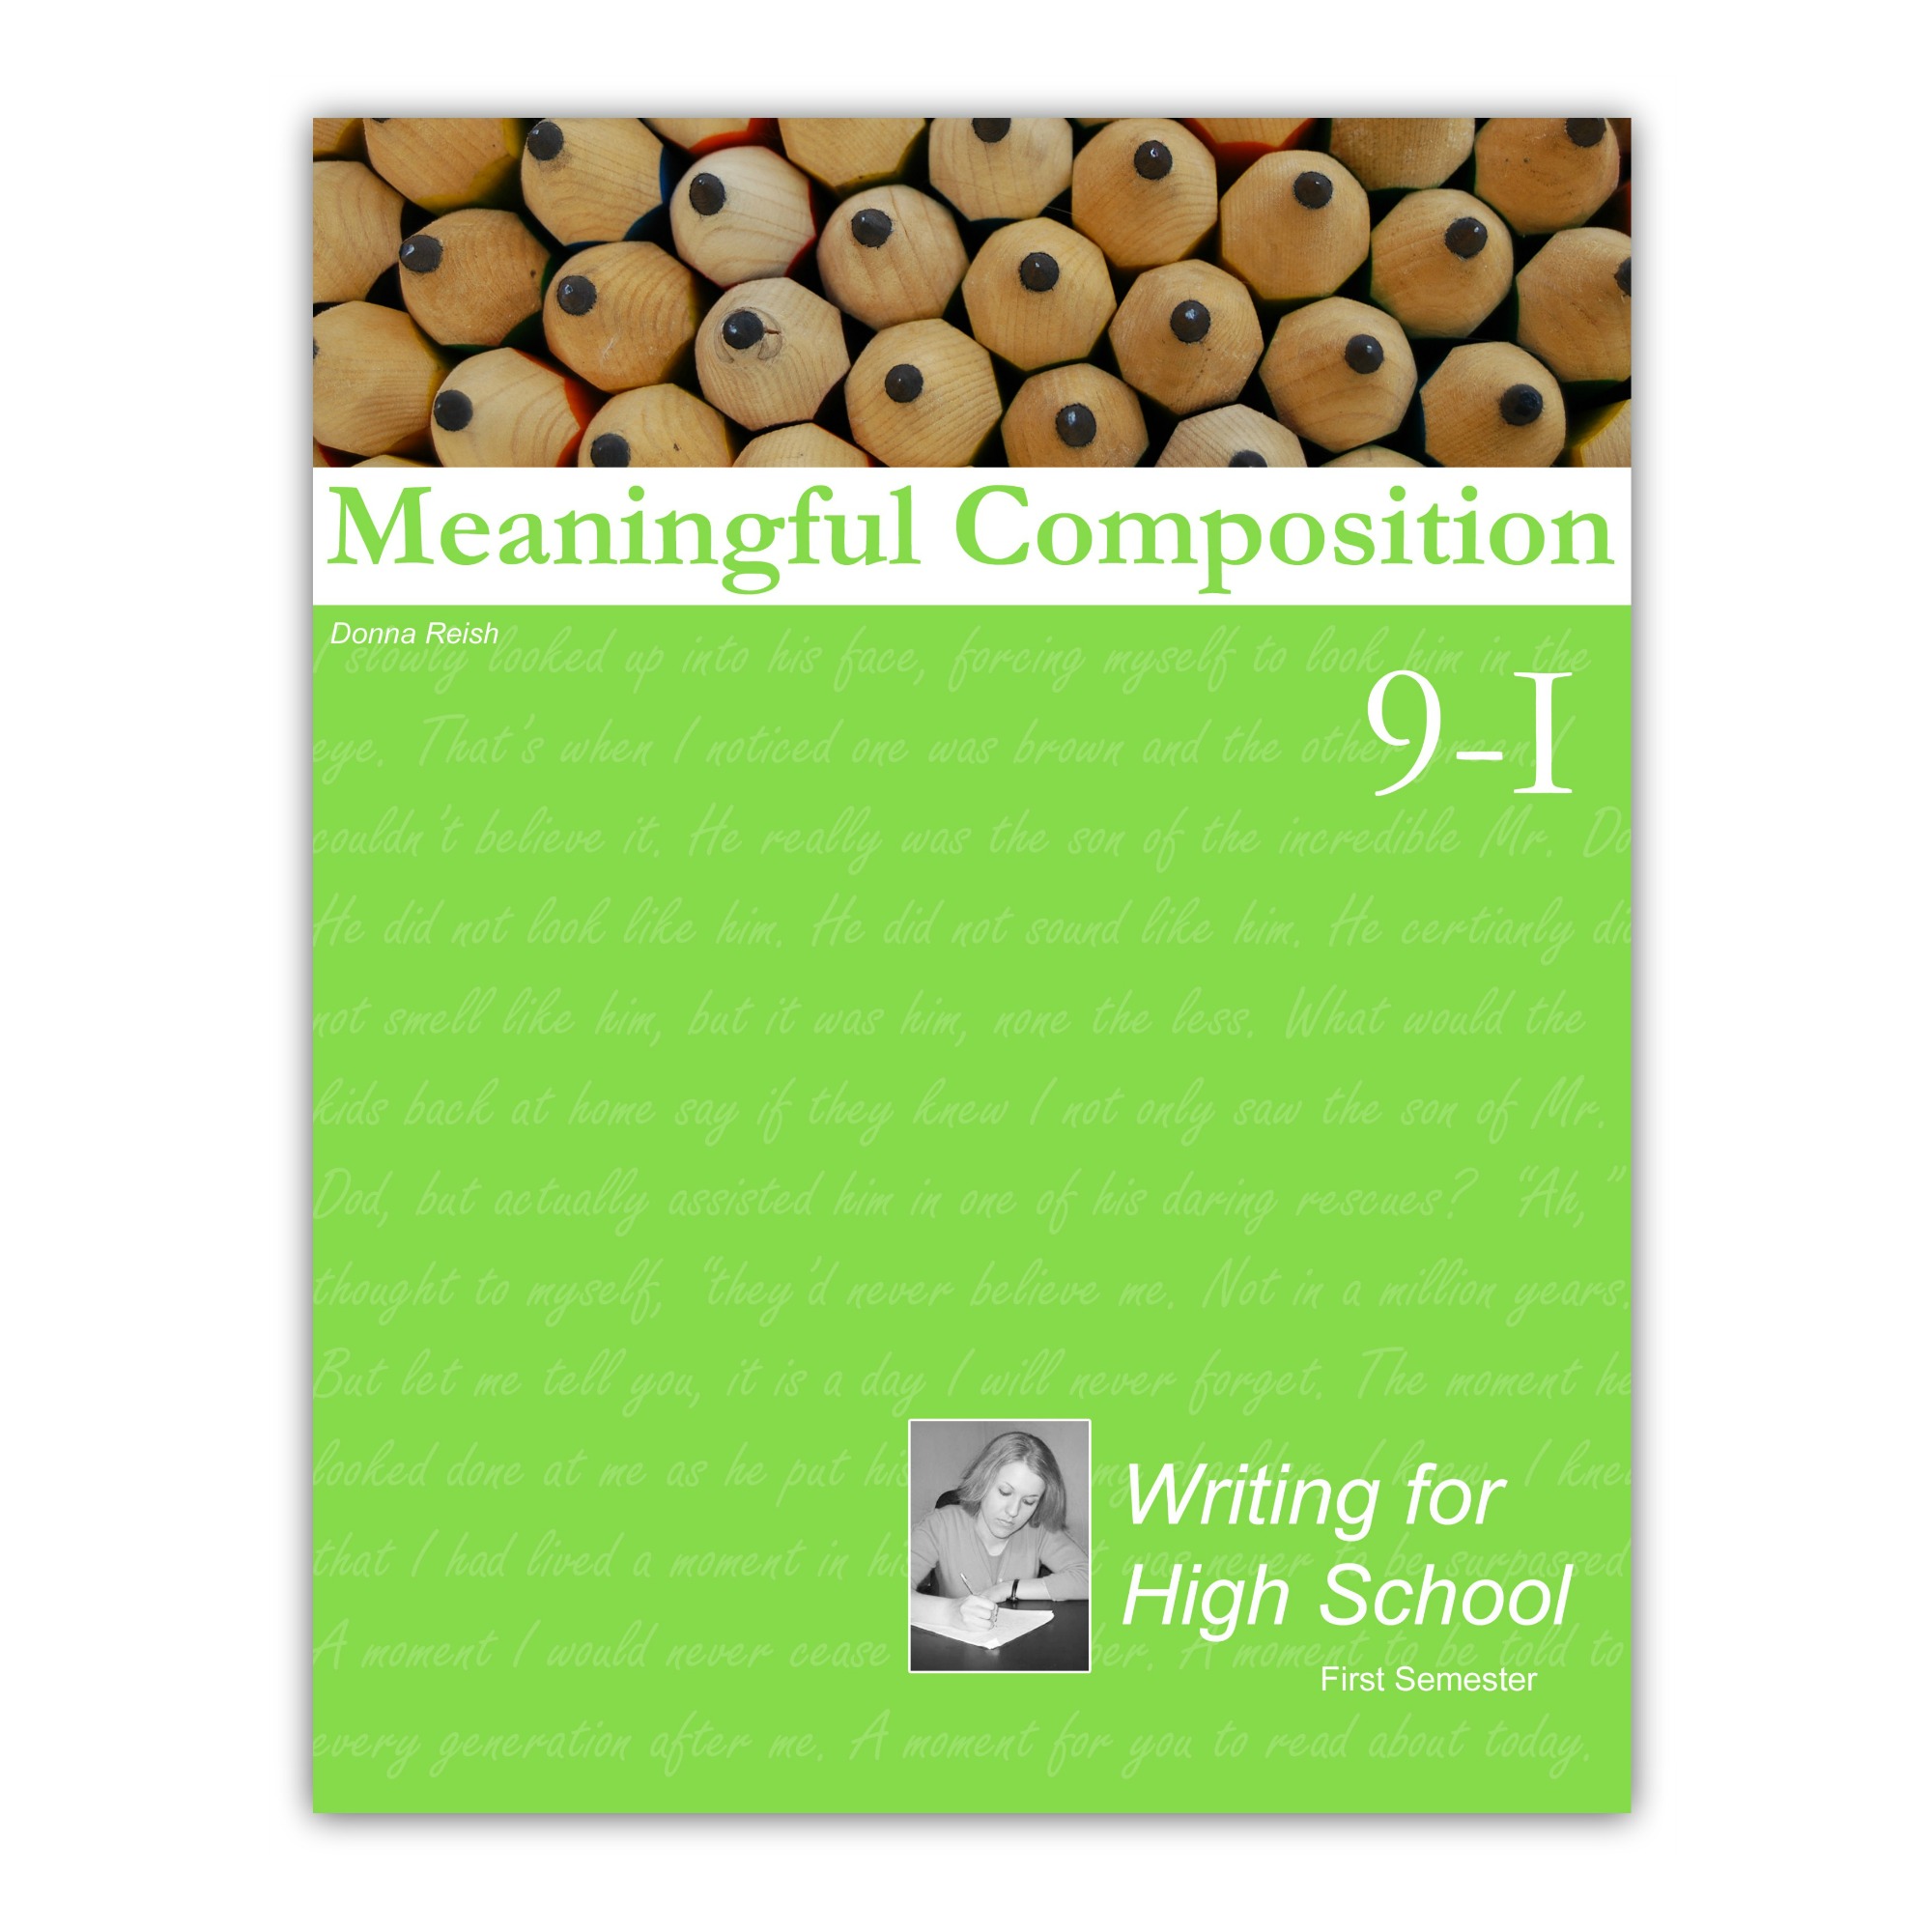 Meaningful Composition 9 I: Writing for High School